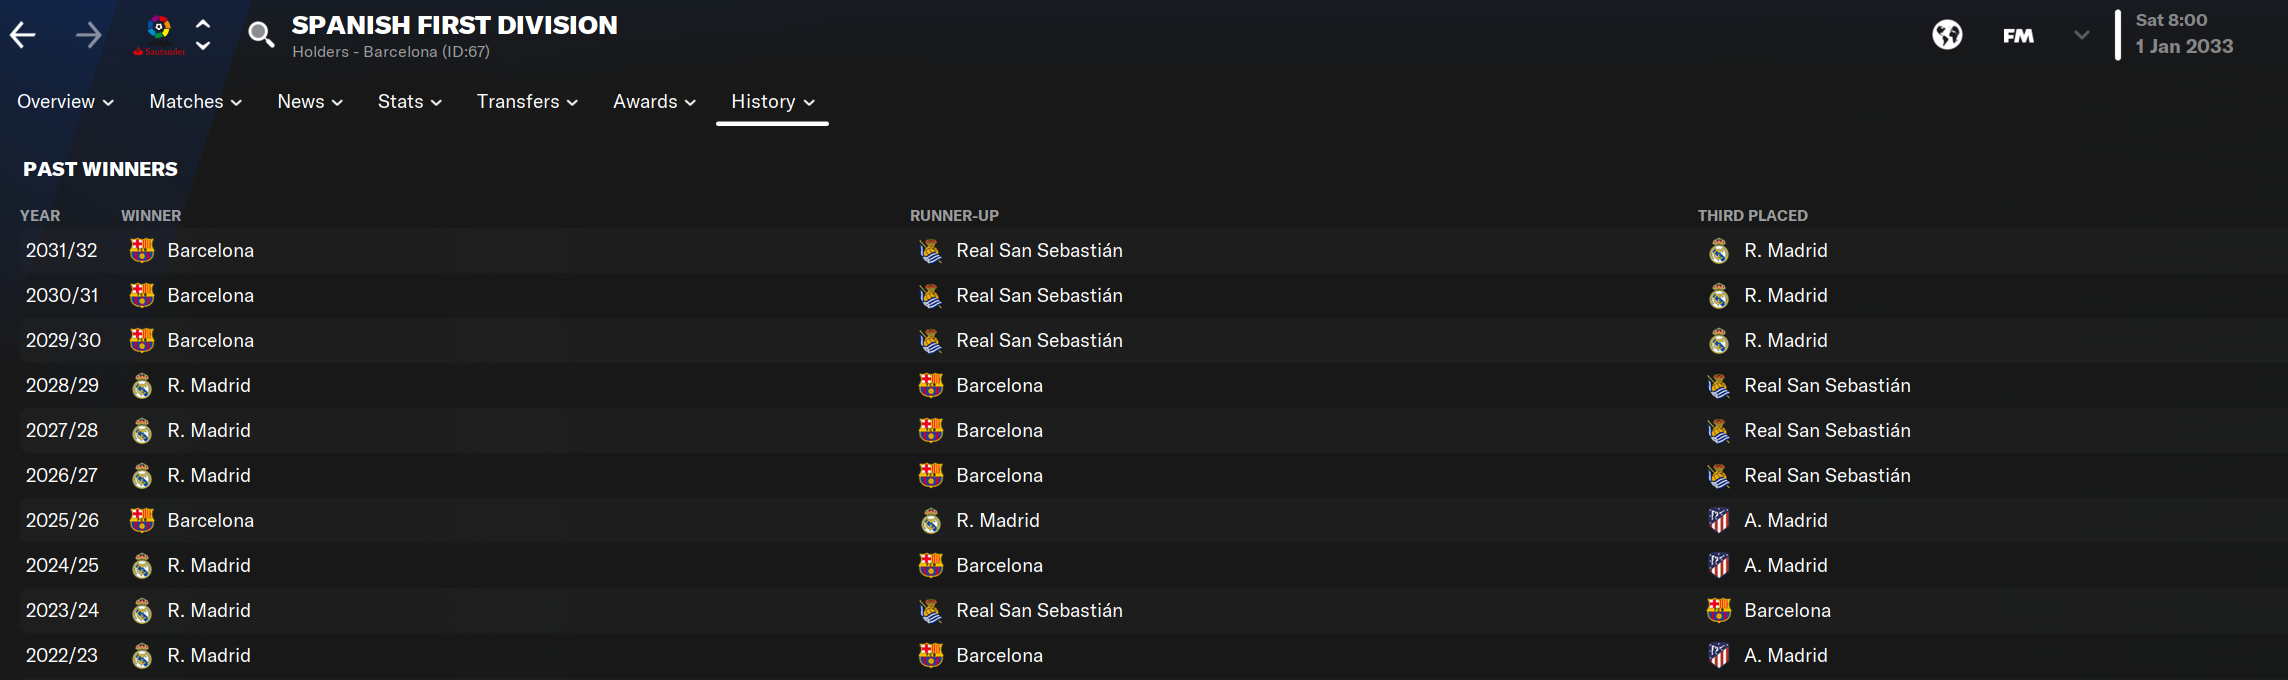 Football Manager Future Save - Spanish First Division